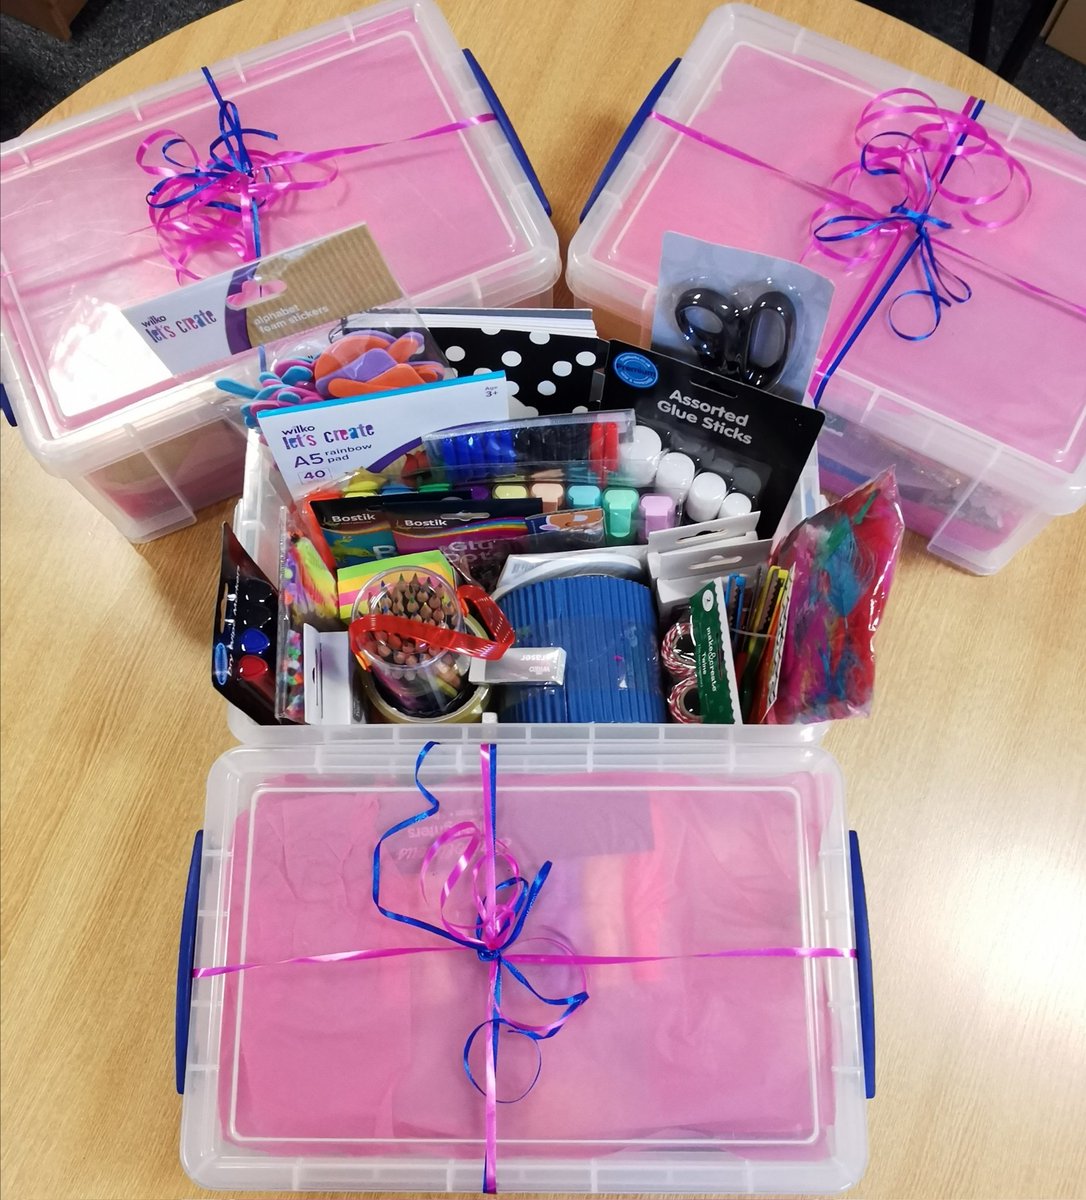 🌟 Back to School Giveaway 🌟 LbQ have a number of goodie boxes filled with stationery for you awesome teachers. To #win, simply: 👣 Follow @LbQorg 🔃 Repost 🌟 Tag a teacher 🙂 Good luck! #LbQ